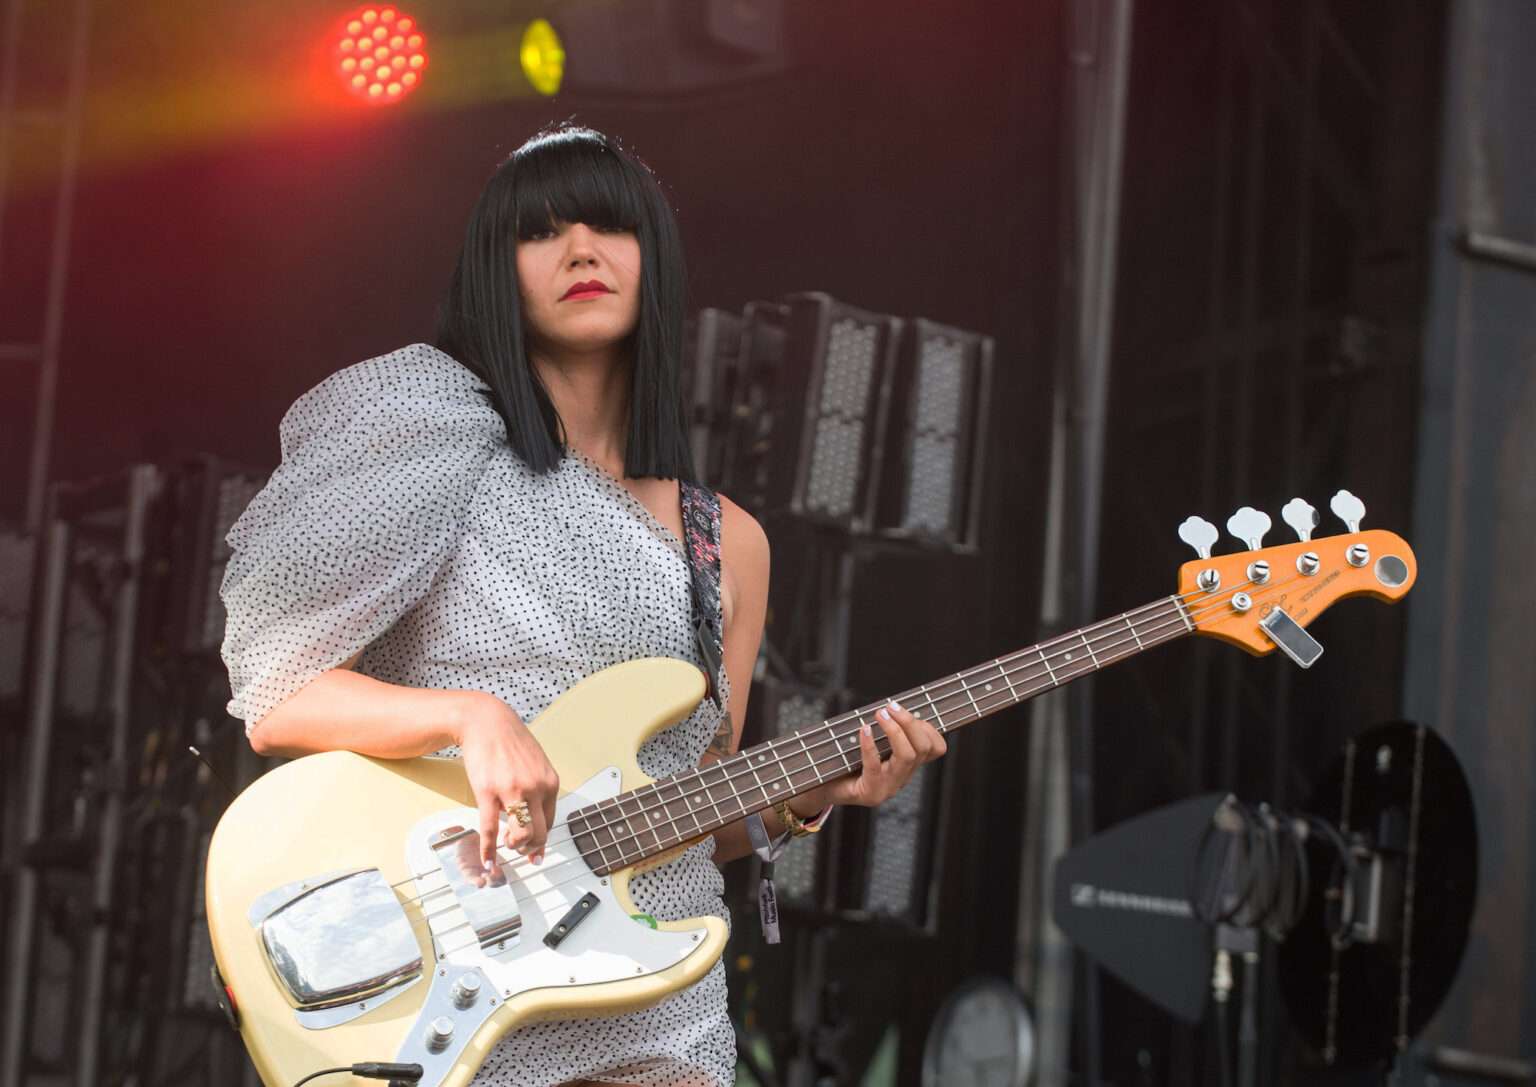 Khruangbin Live at Pitchfork [GALLERY] - Chicago Music Guide